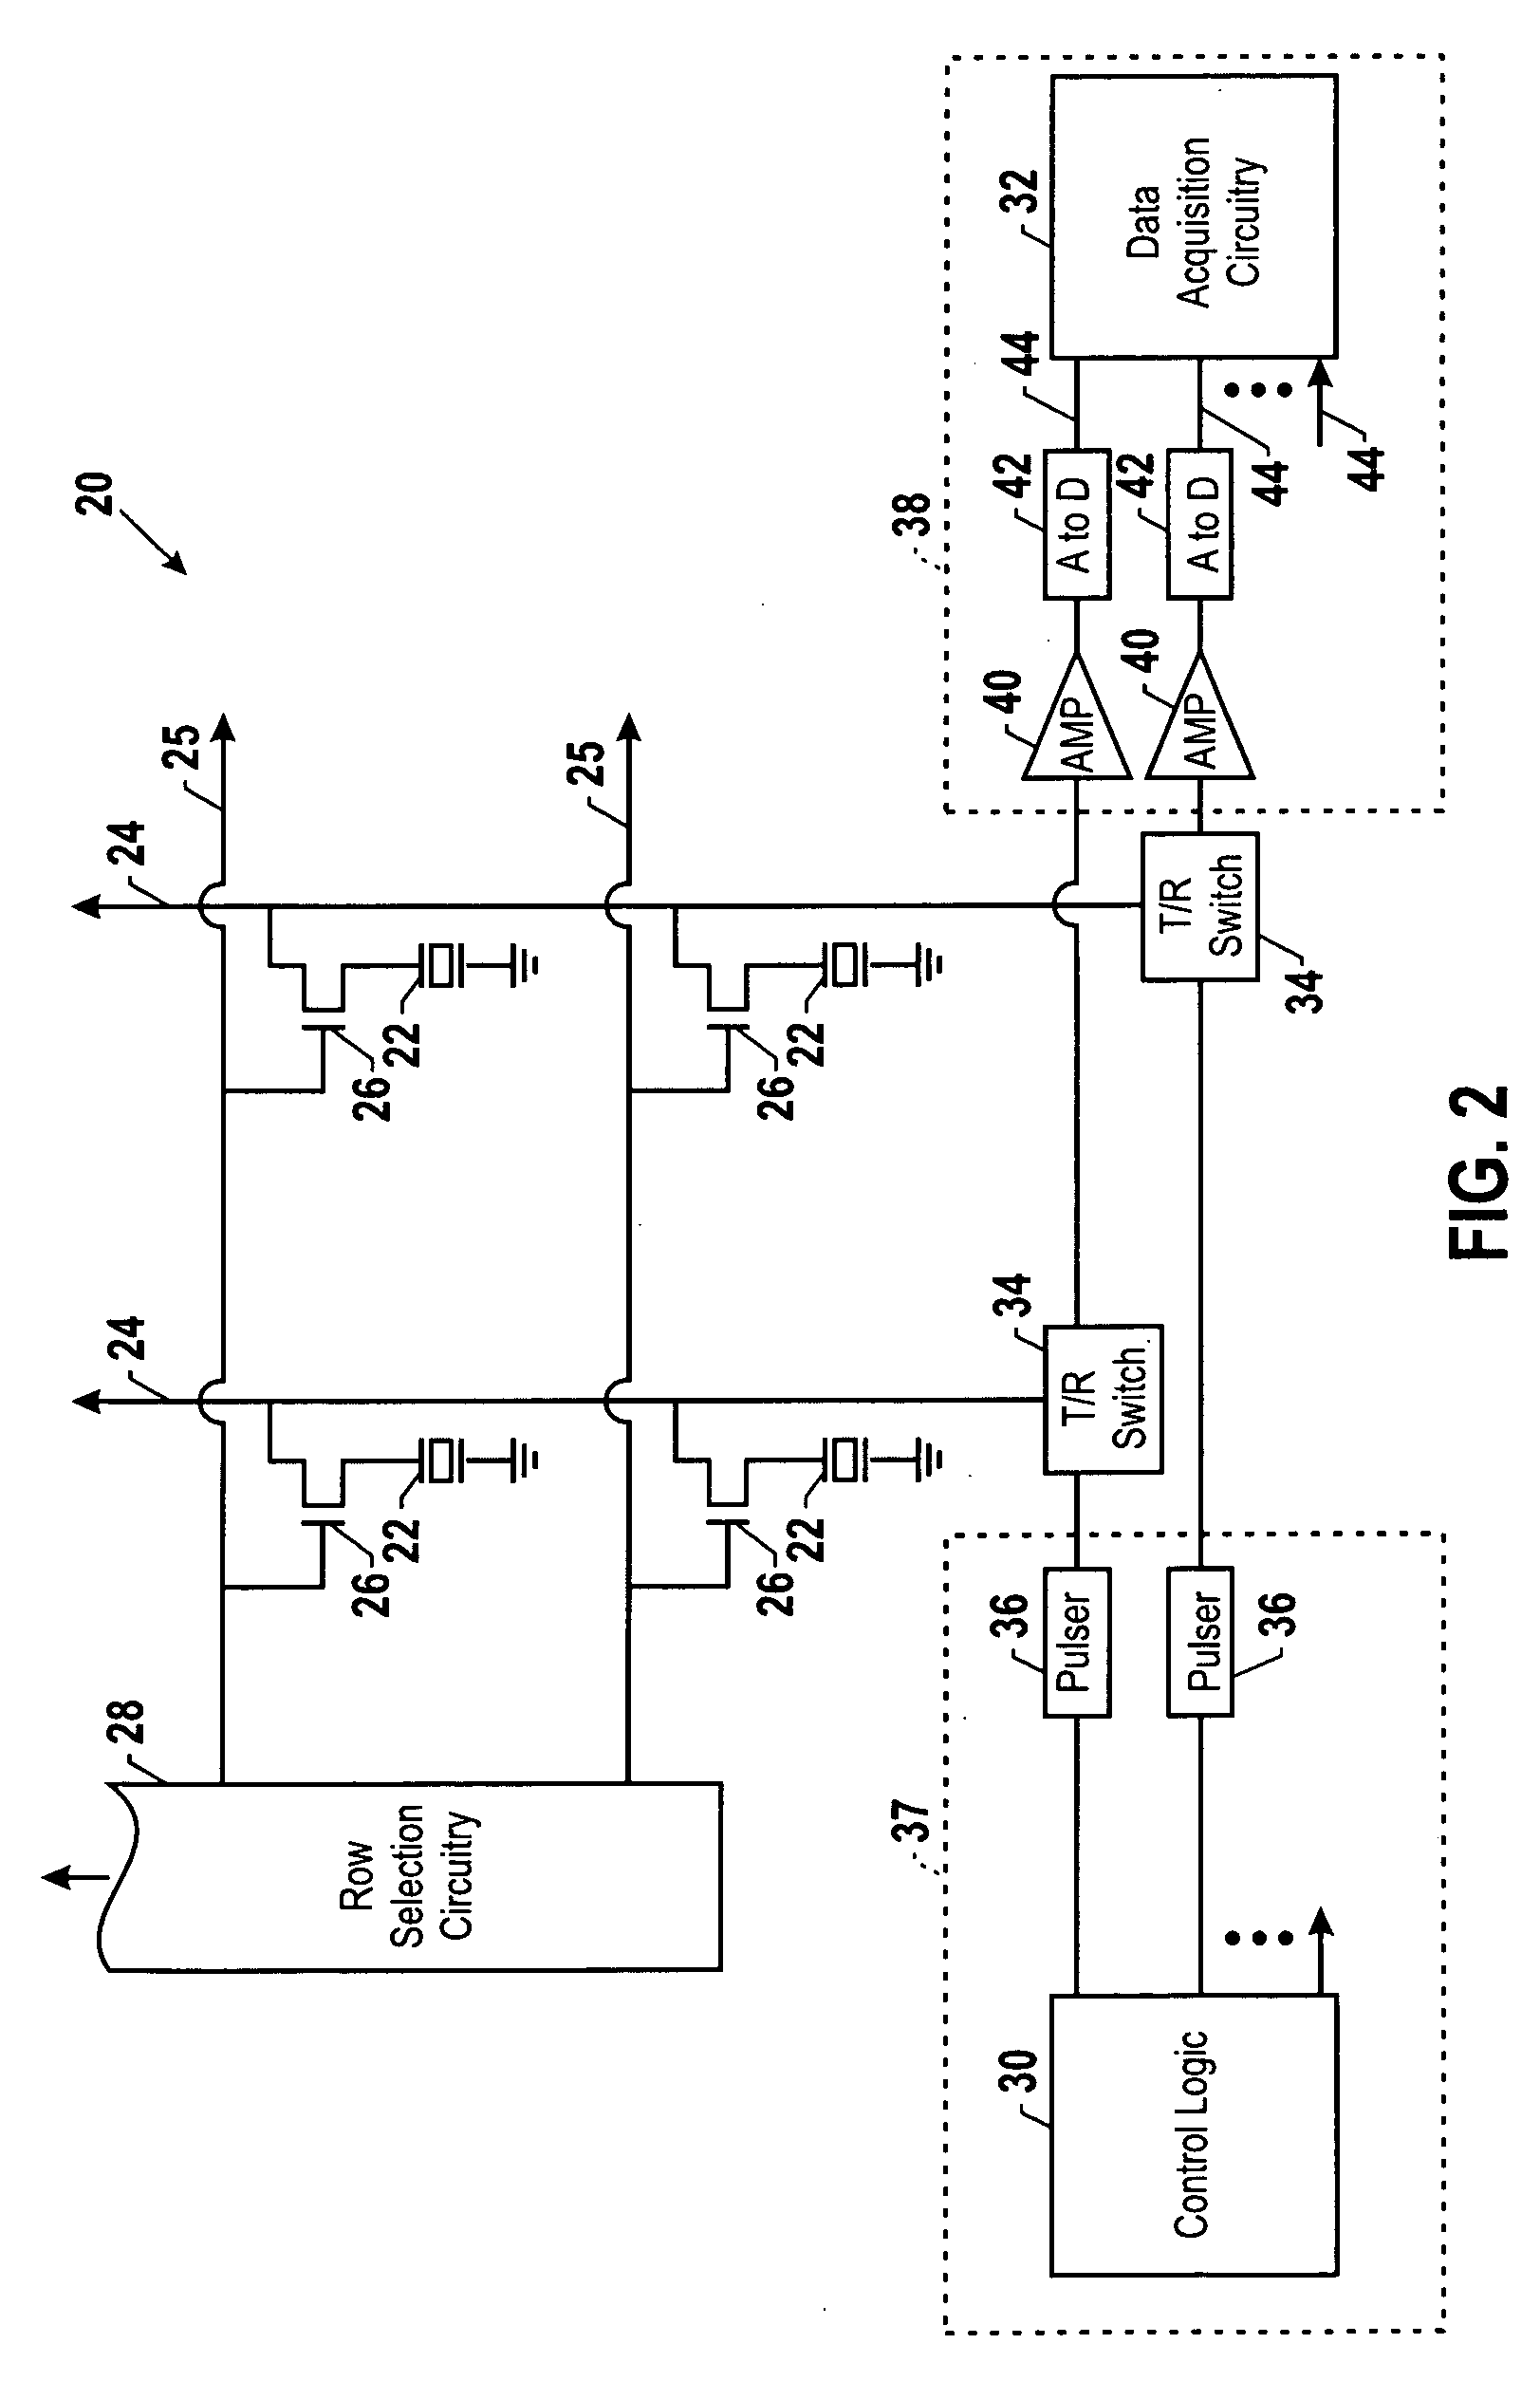 Systems and methods for operating a two-dimensional transducer array